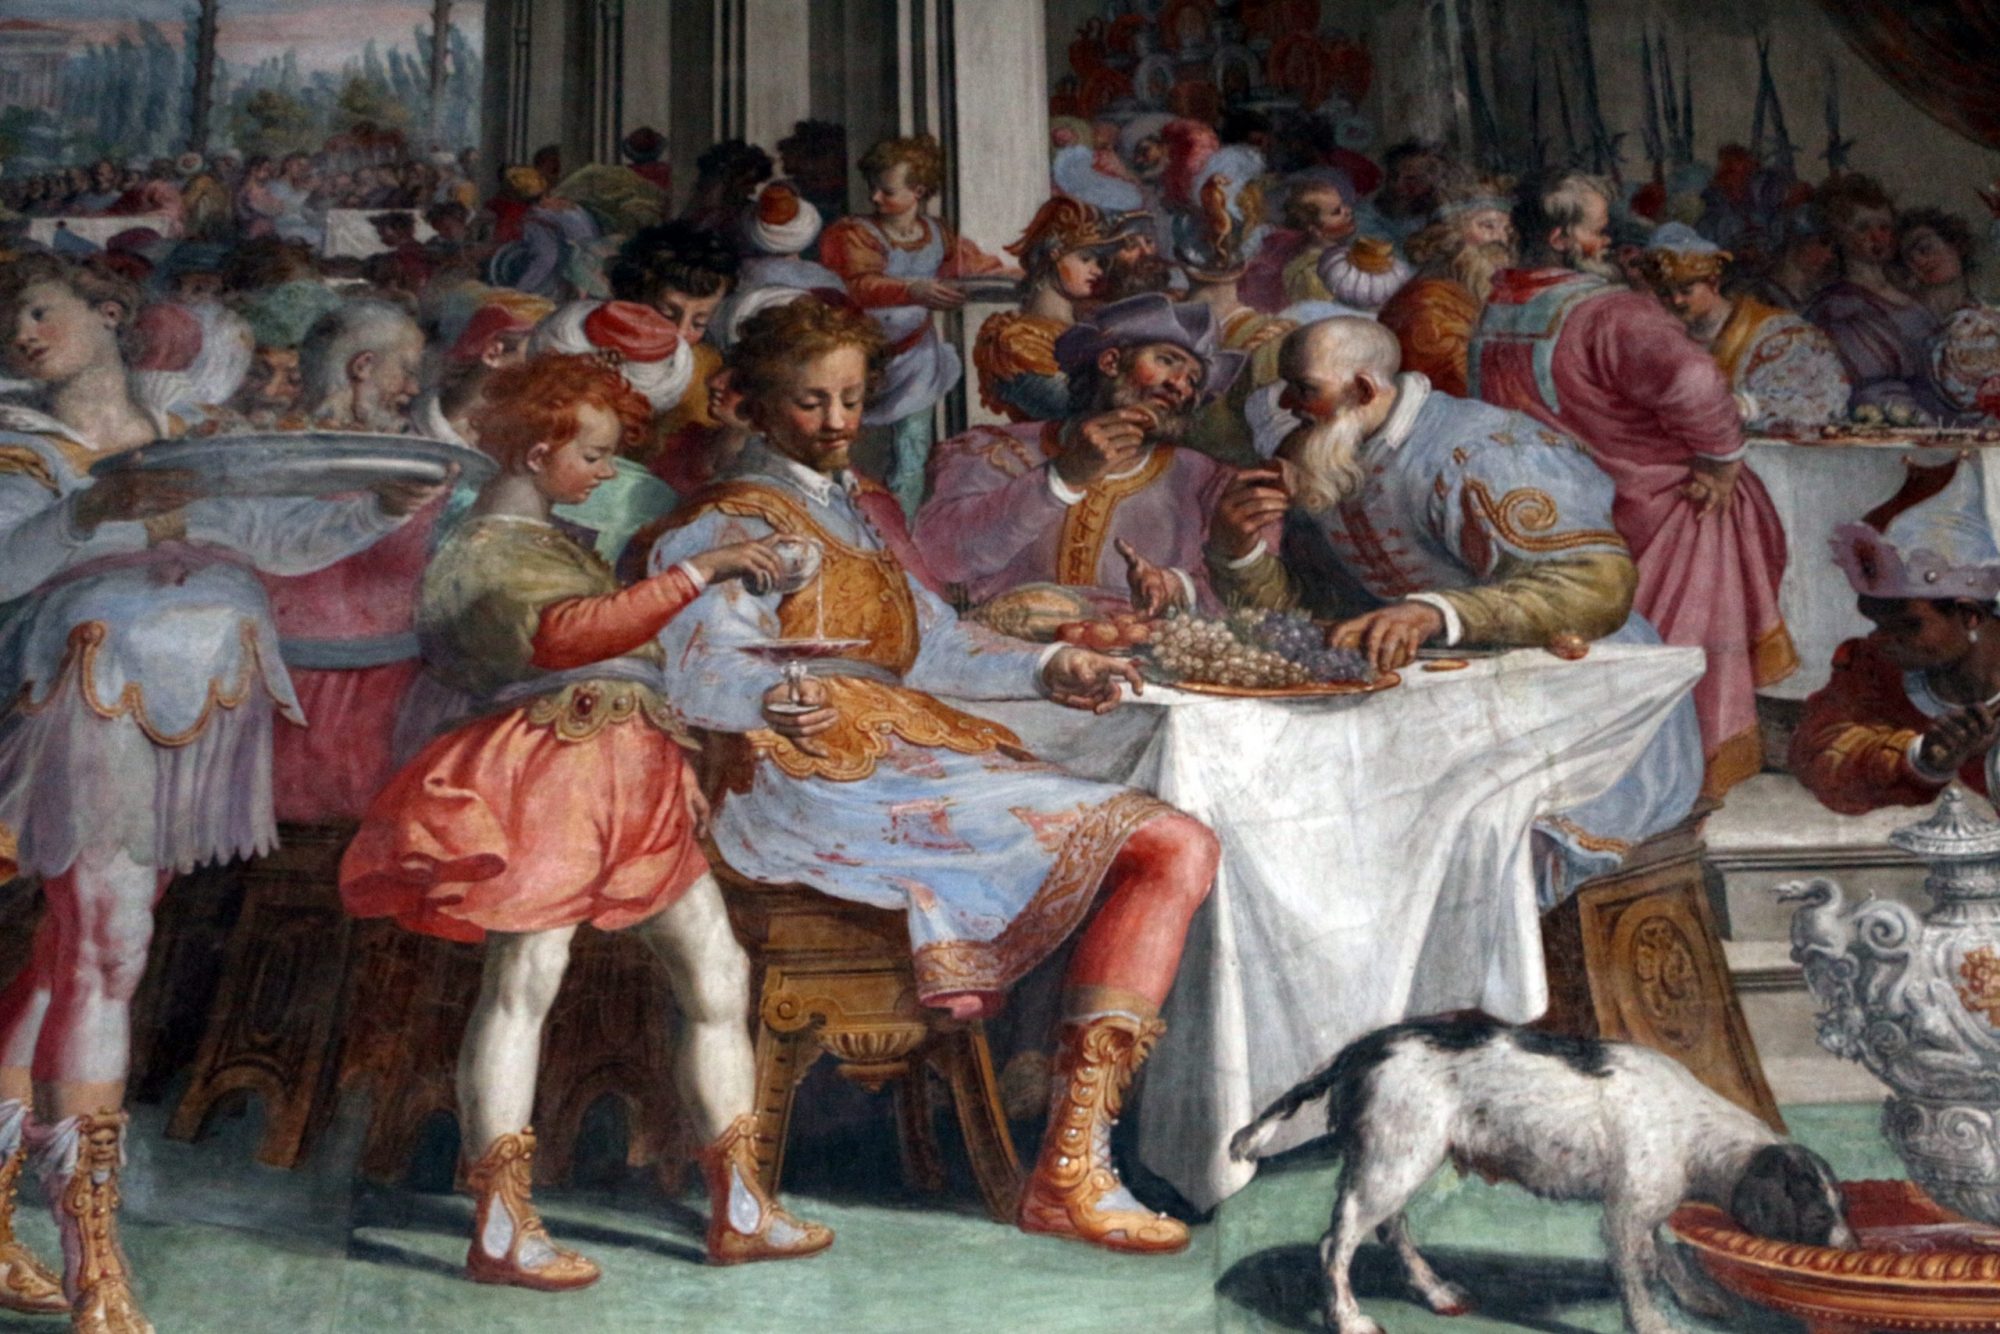 This fresco painting (1590-94) by Agostino Ciampelli depicts a lively and crowded banquet. The painting is situated in Palazzo Tornabuoni, a privately owned Renaissance palace in Florence.